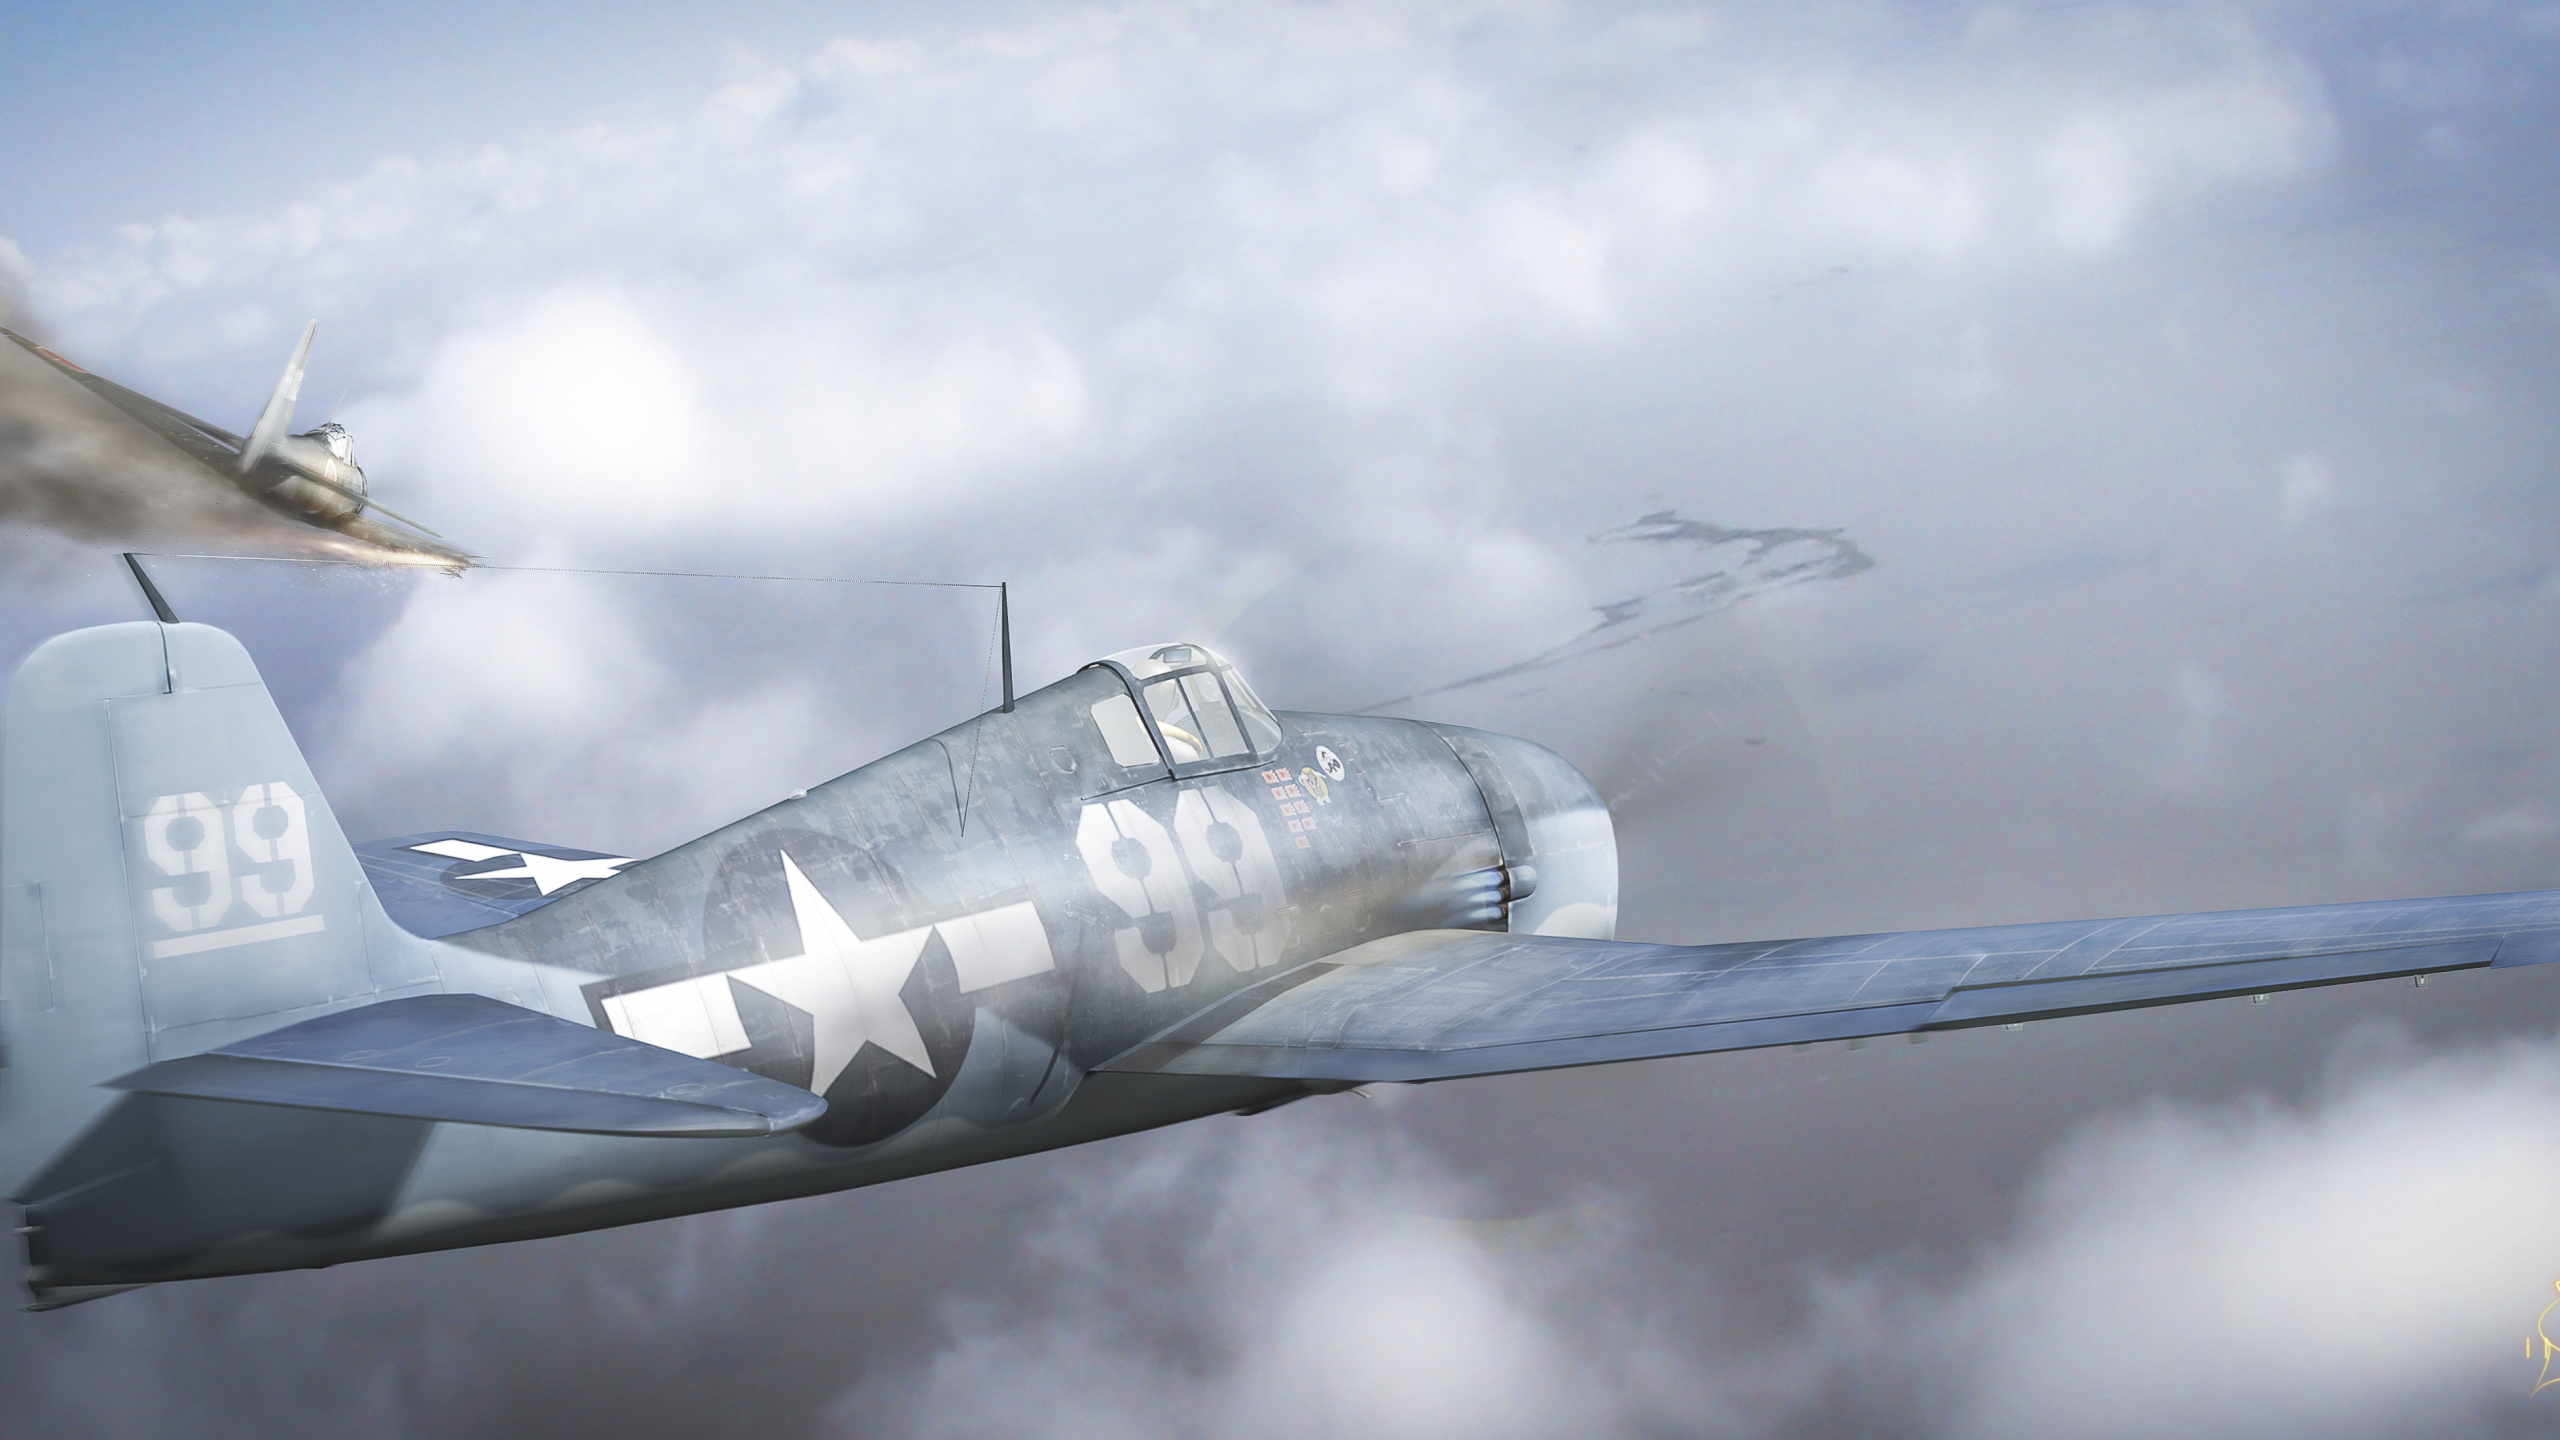 Gray and White Airplane Under White Clouds During Daytime. Wallpaper in 2560x1440 Resolution